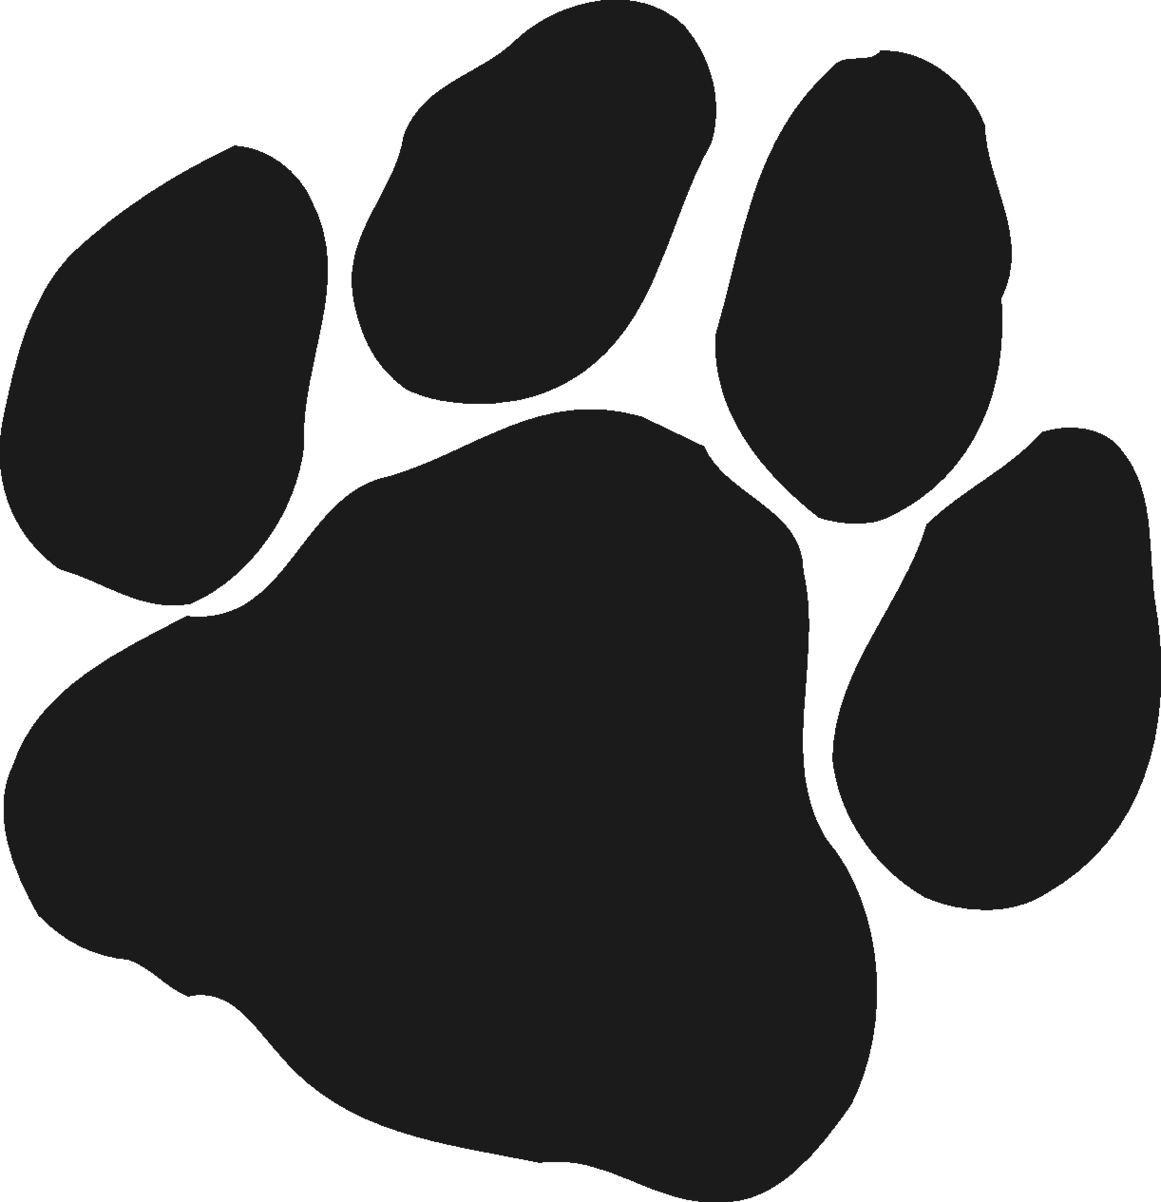 Wildcat Paw Logo Clipart - Free to use Clip Art Resource